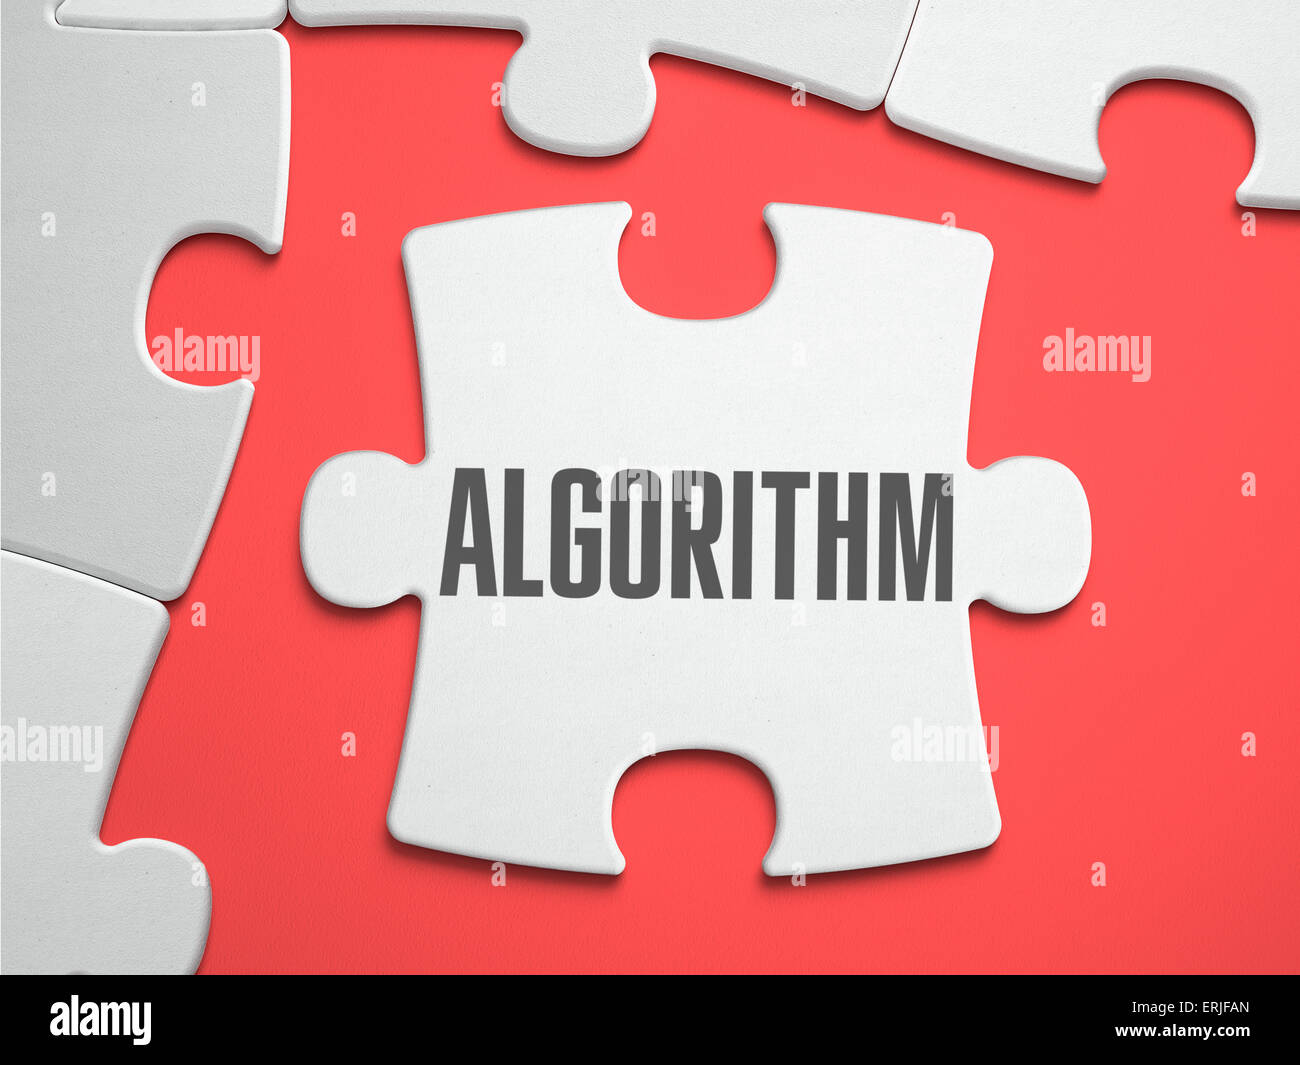 Algorithm - Puzzle on the Place of Missing Pieces. Stock Photo